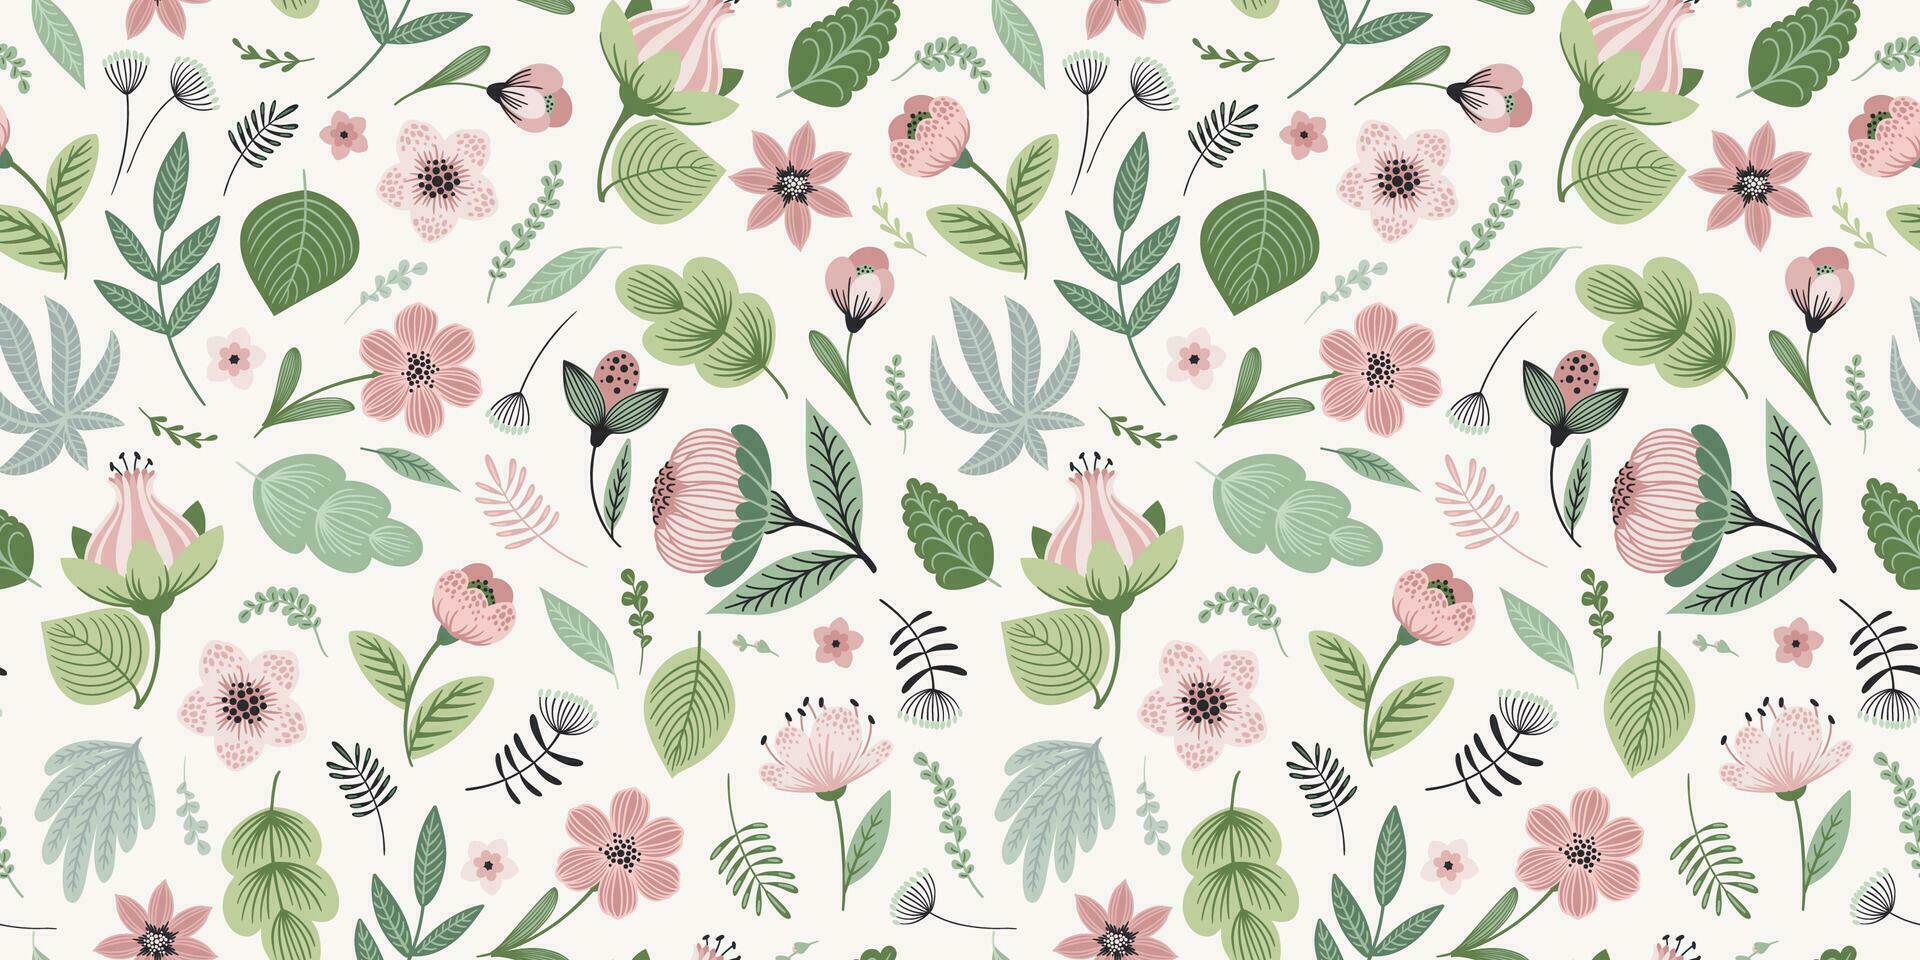 Abstract gentle seamless pattern with leaves, flowers and grass. Modern exotic design for paper, cover, fabric, interior decor and other use. vector